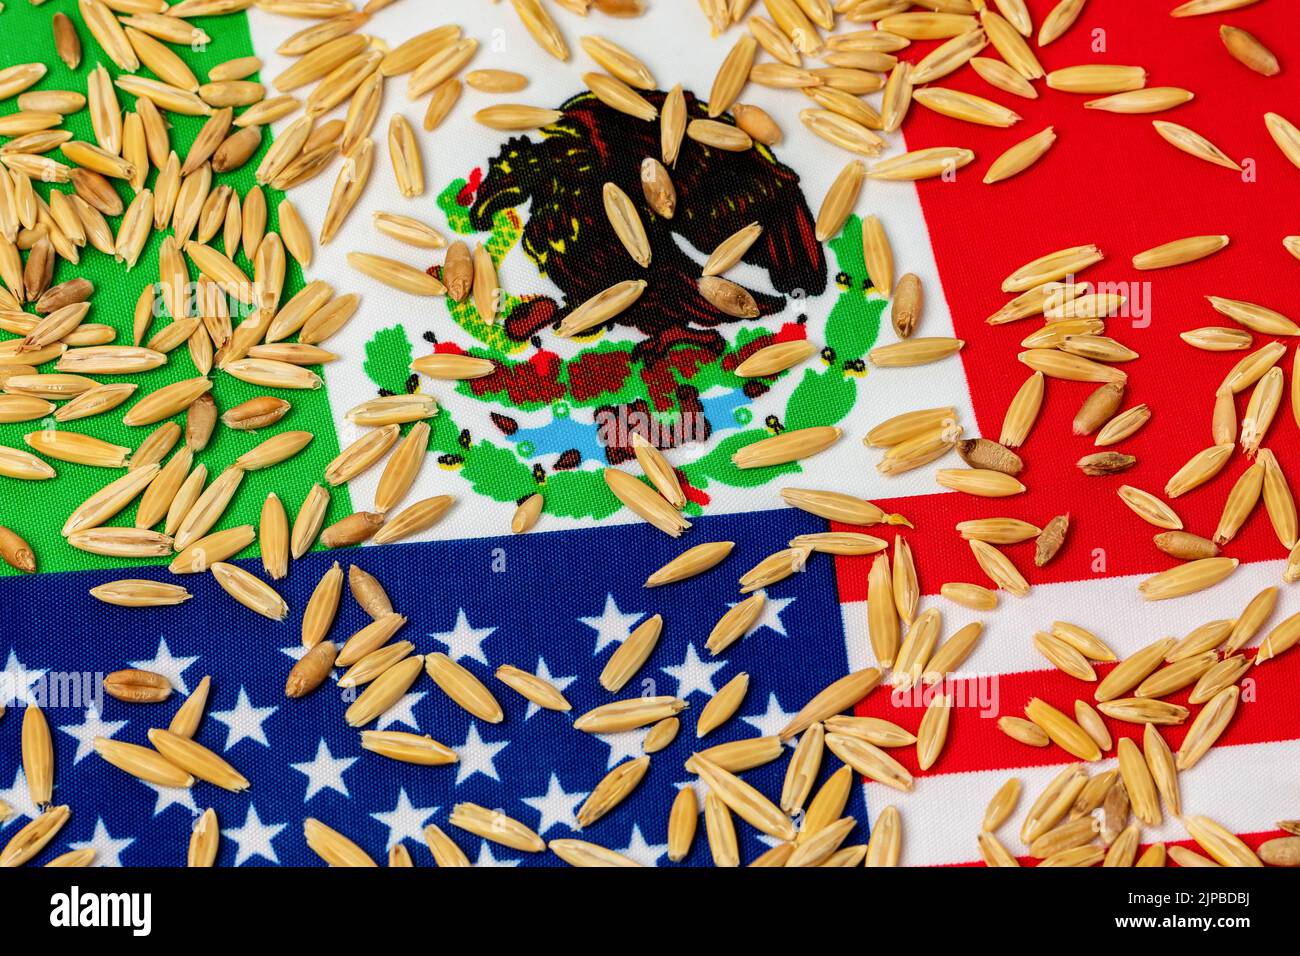 United States of America, Mexico flags and oats. Oat trade agreement, imports and exports concept. Stock Photo